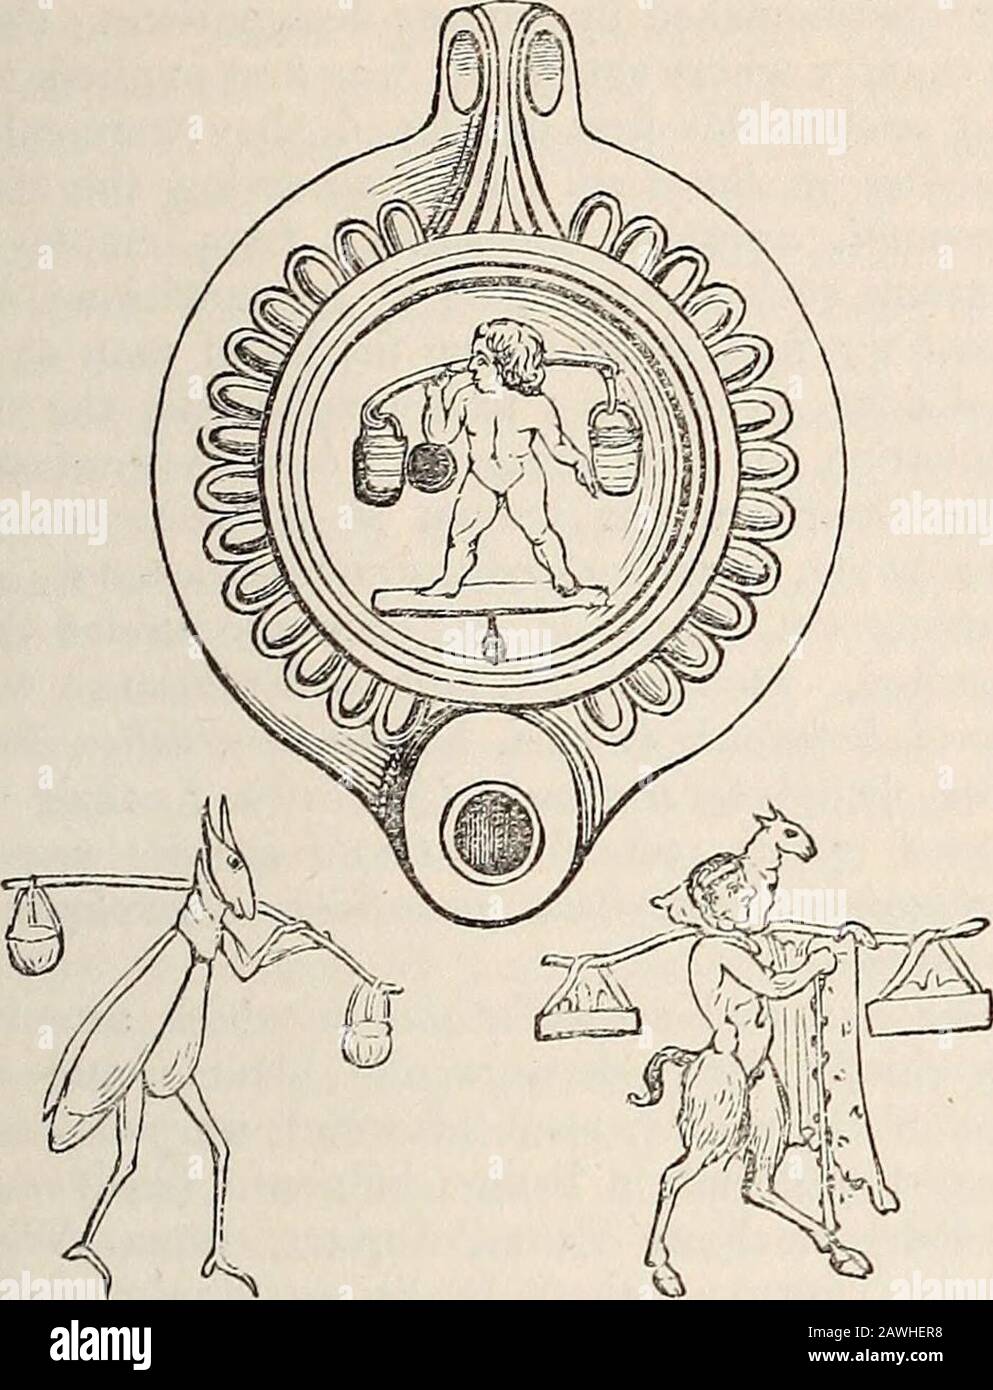 A dictionary of Greek and Roman antiquities.. . owns of Asia,and approved of by the Roman proconsul ; ofthese, one was the chief asiarch, and frequently,but not always, resided at Ephesus. Their officelasted only for a year ; but they appear to haveenjoyed the title as a mark of courtesy for the restof their lives. In the other Roman provinces inAsia, we find similar magistrates corresponding tothe Asiarchae in proconsular Asia, as for instancethe Bithyniarchae, Galatarchae, Lyciarchae, &c.(Strab. xiv. p. 649 ; Acts, xix. 31., with thenotes of Wetstein and Kuinoel ; Euseb. H. E. iv.15 ; Winer, Stock Photo